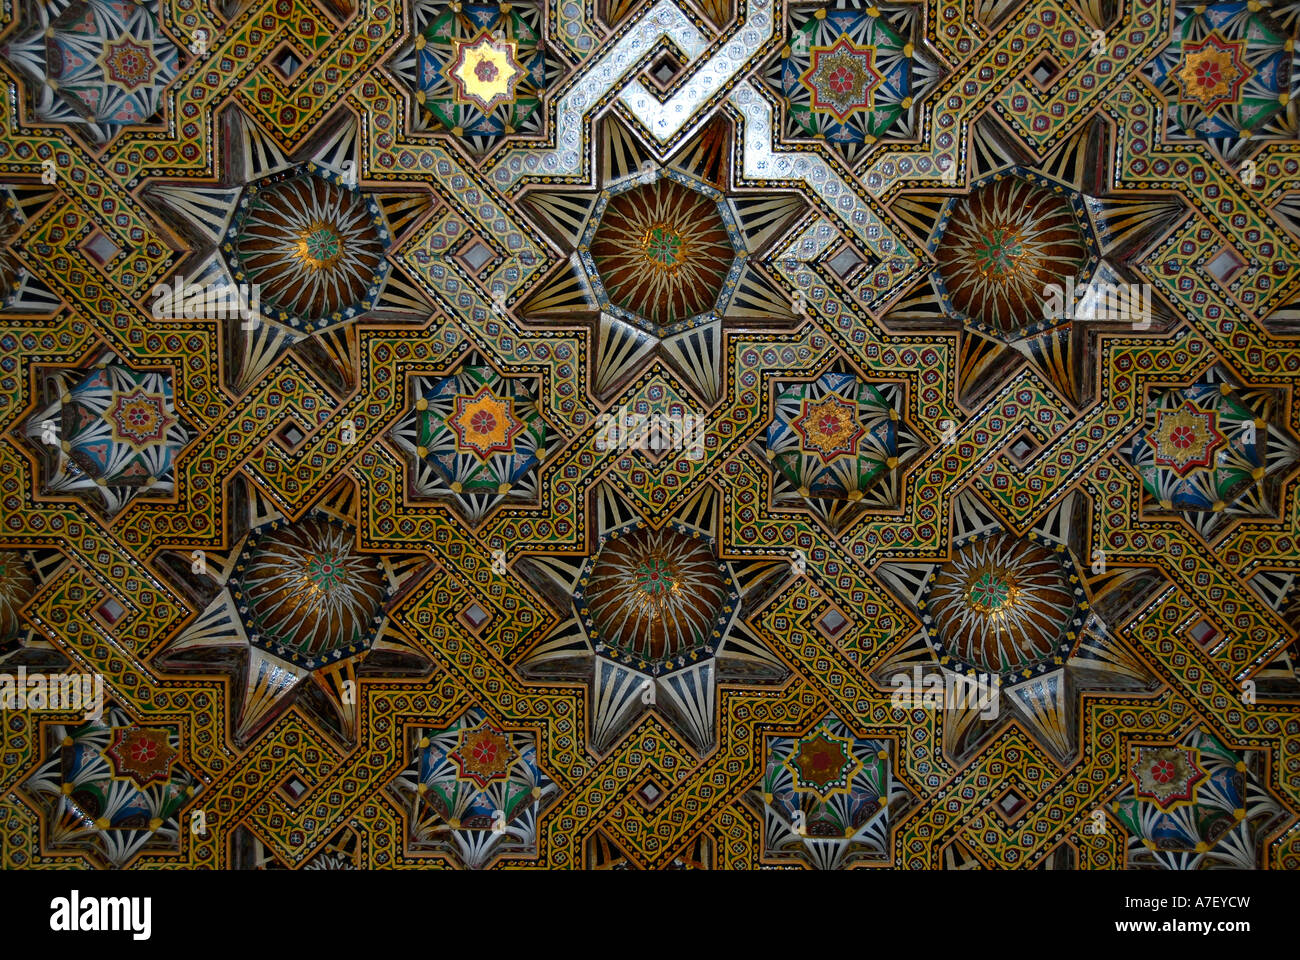 Fine arts colourful decoration of a wooden ceiling in mosque Hassan II Casablanca Morocco Stock Photo